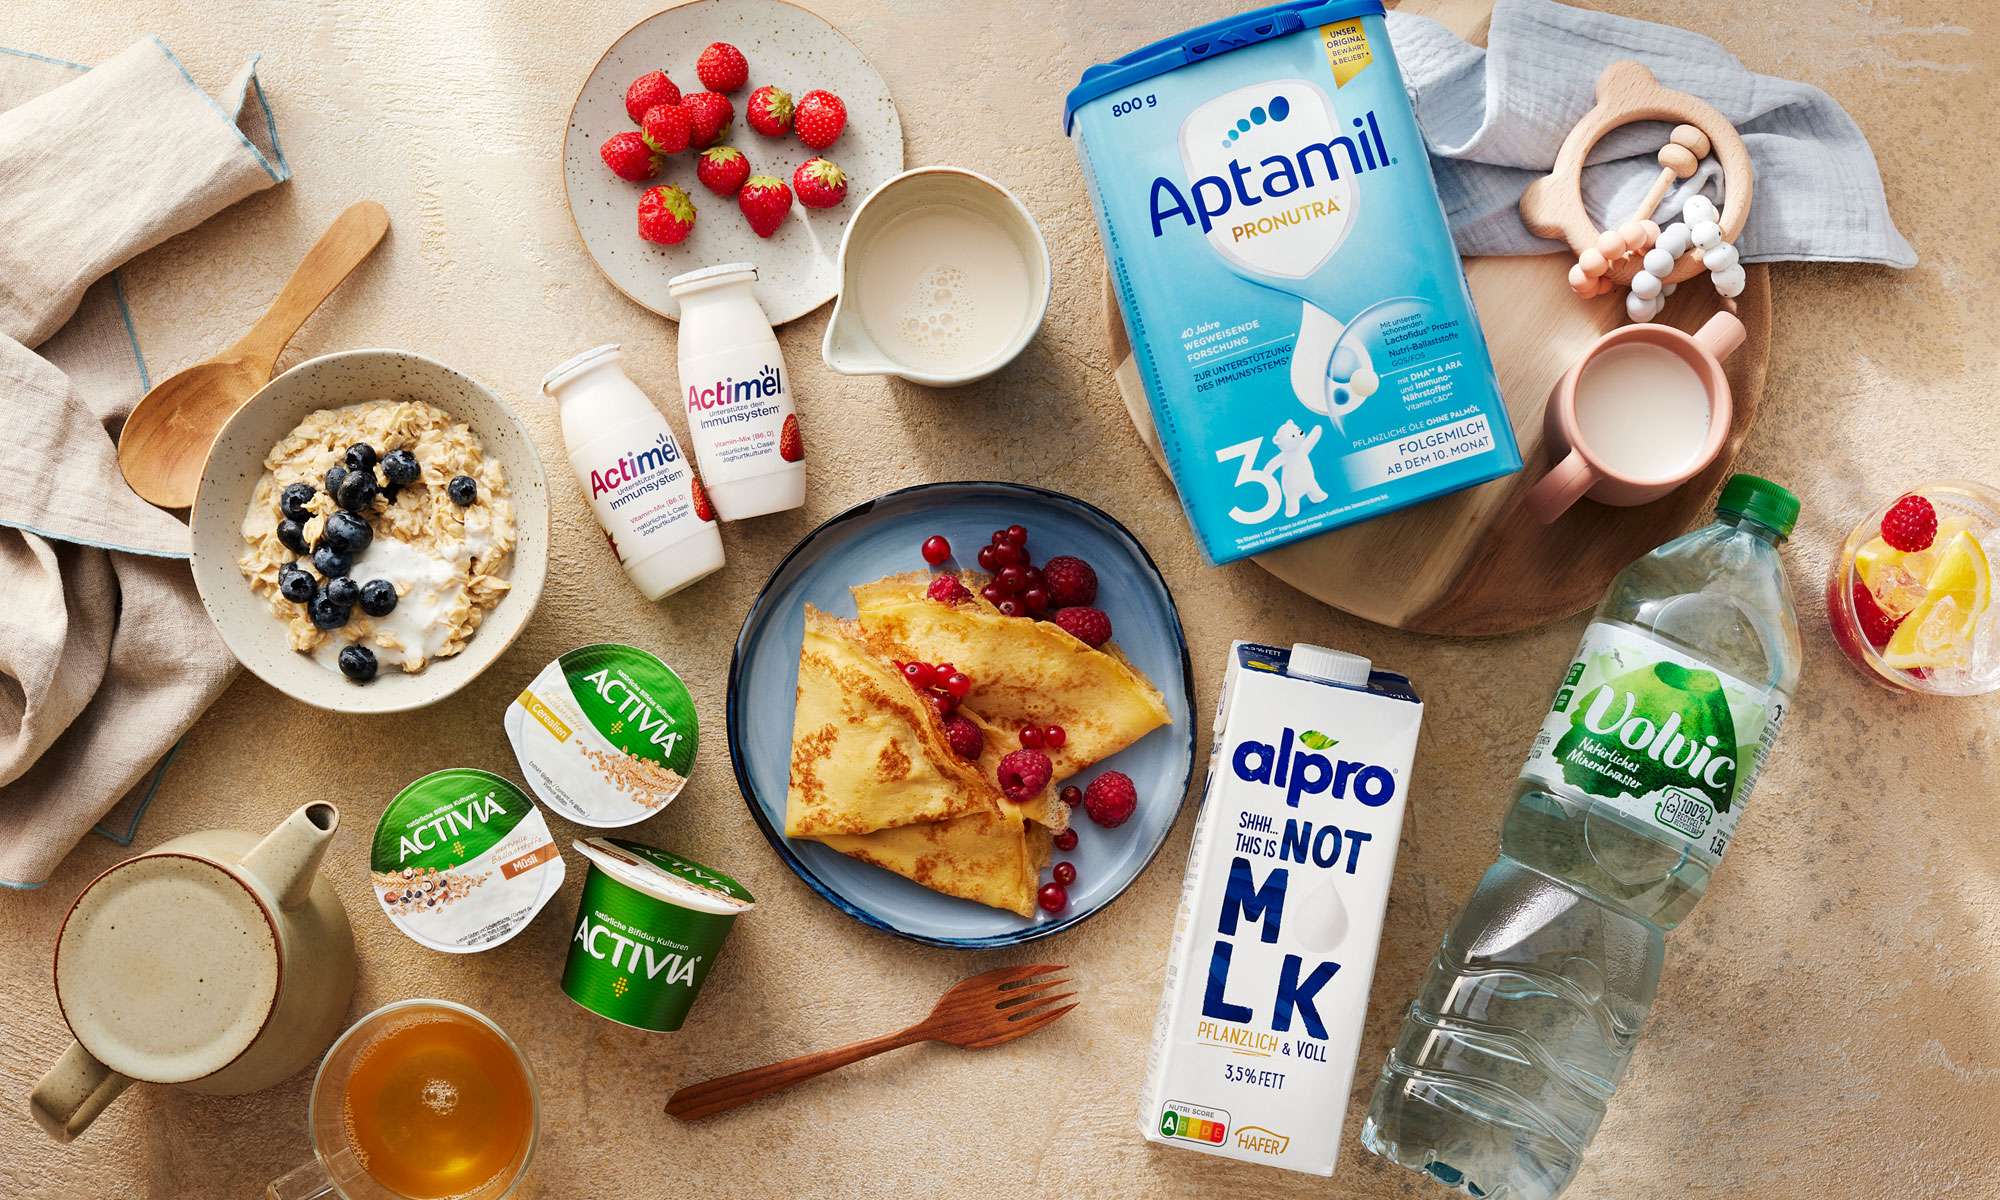 DANONE – Complexity reduced without complication